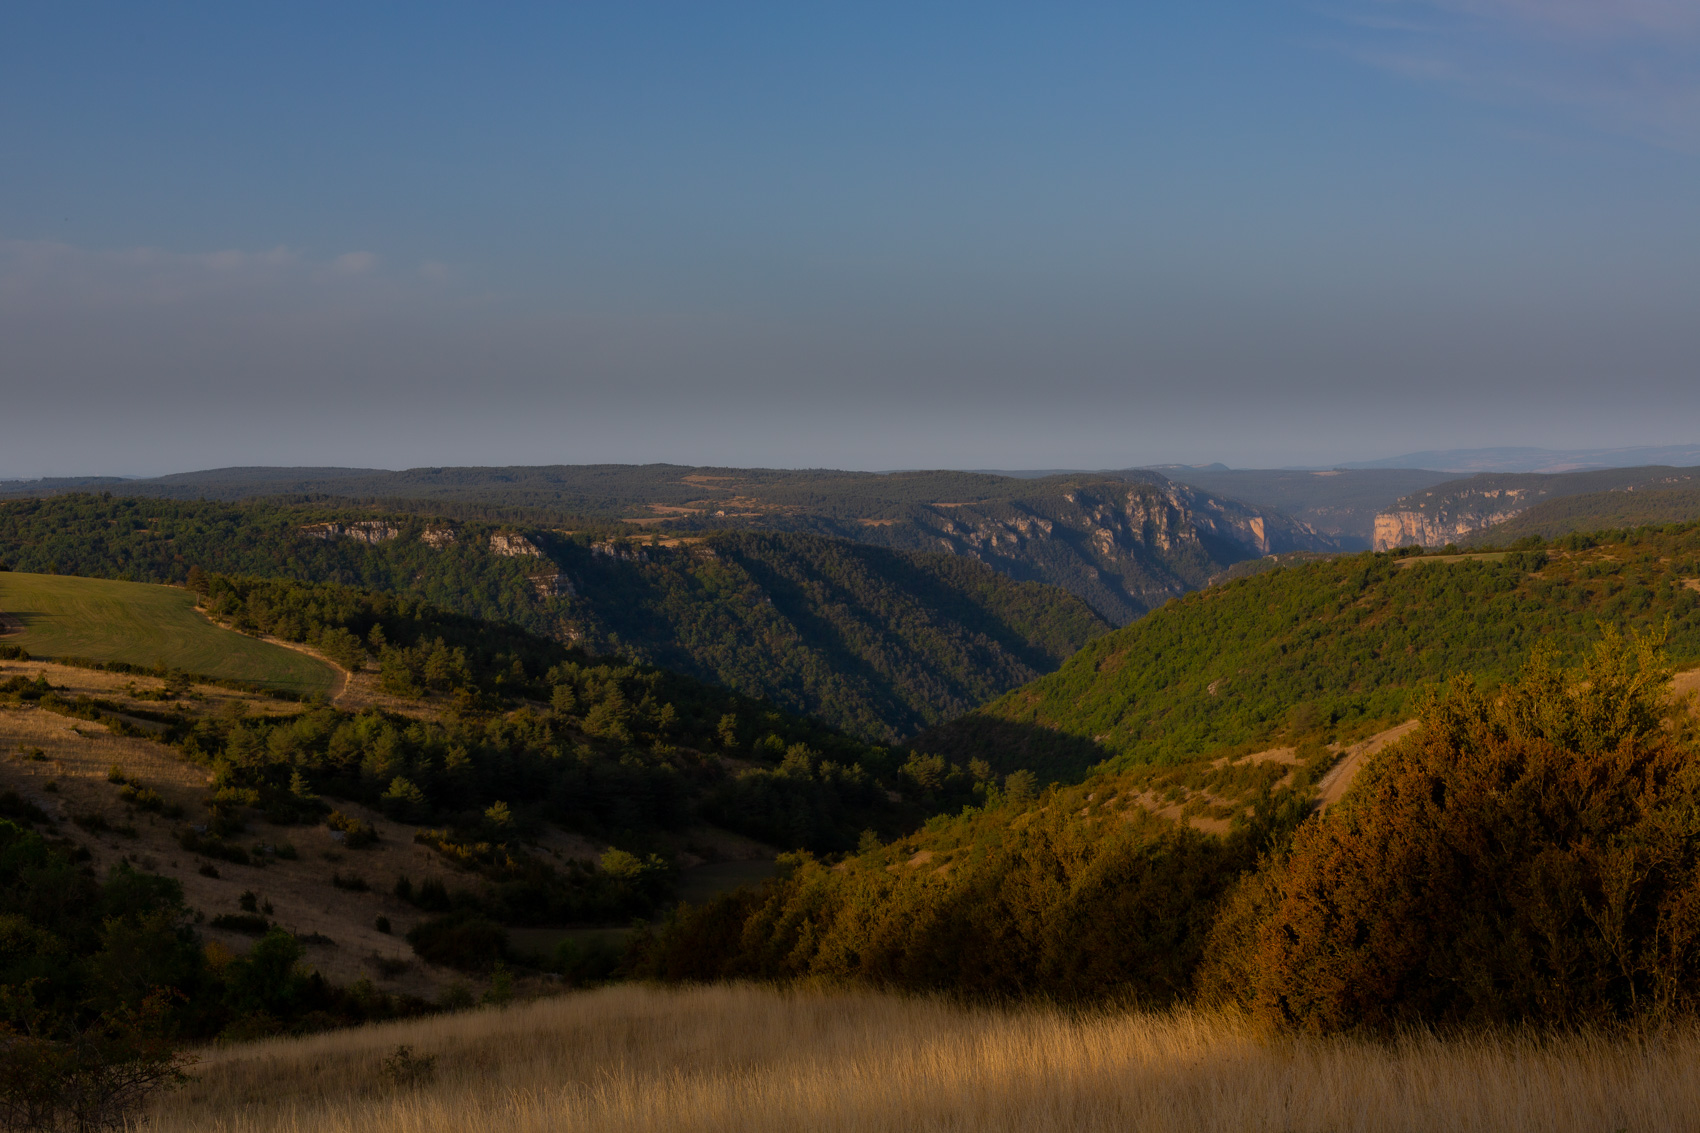 Plateau du causse - Canon EOS 5D Mark III - EF 50 mm f/1,4 USM - ISO 100 - f/11 - 1/250 s